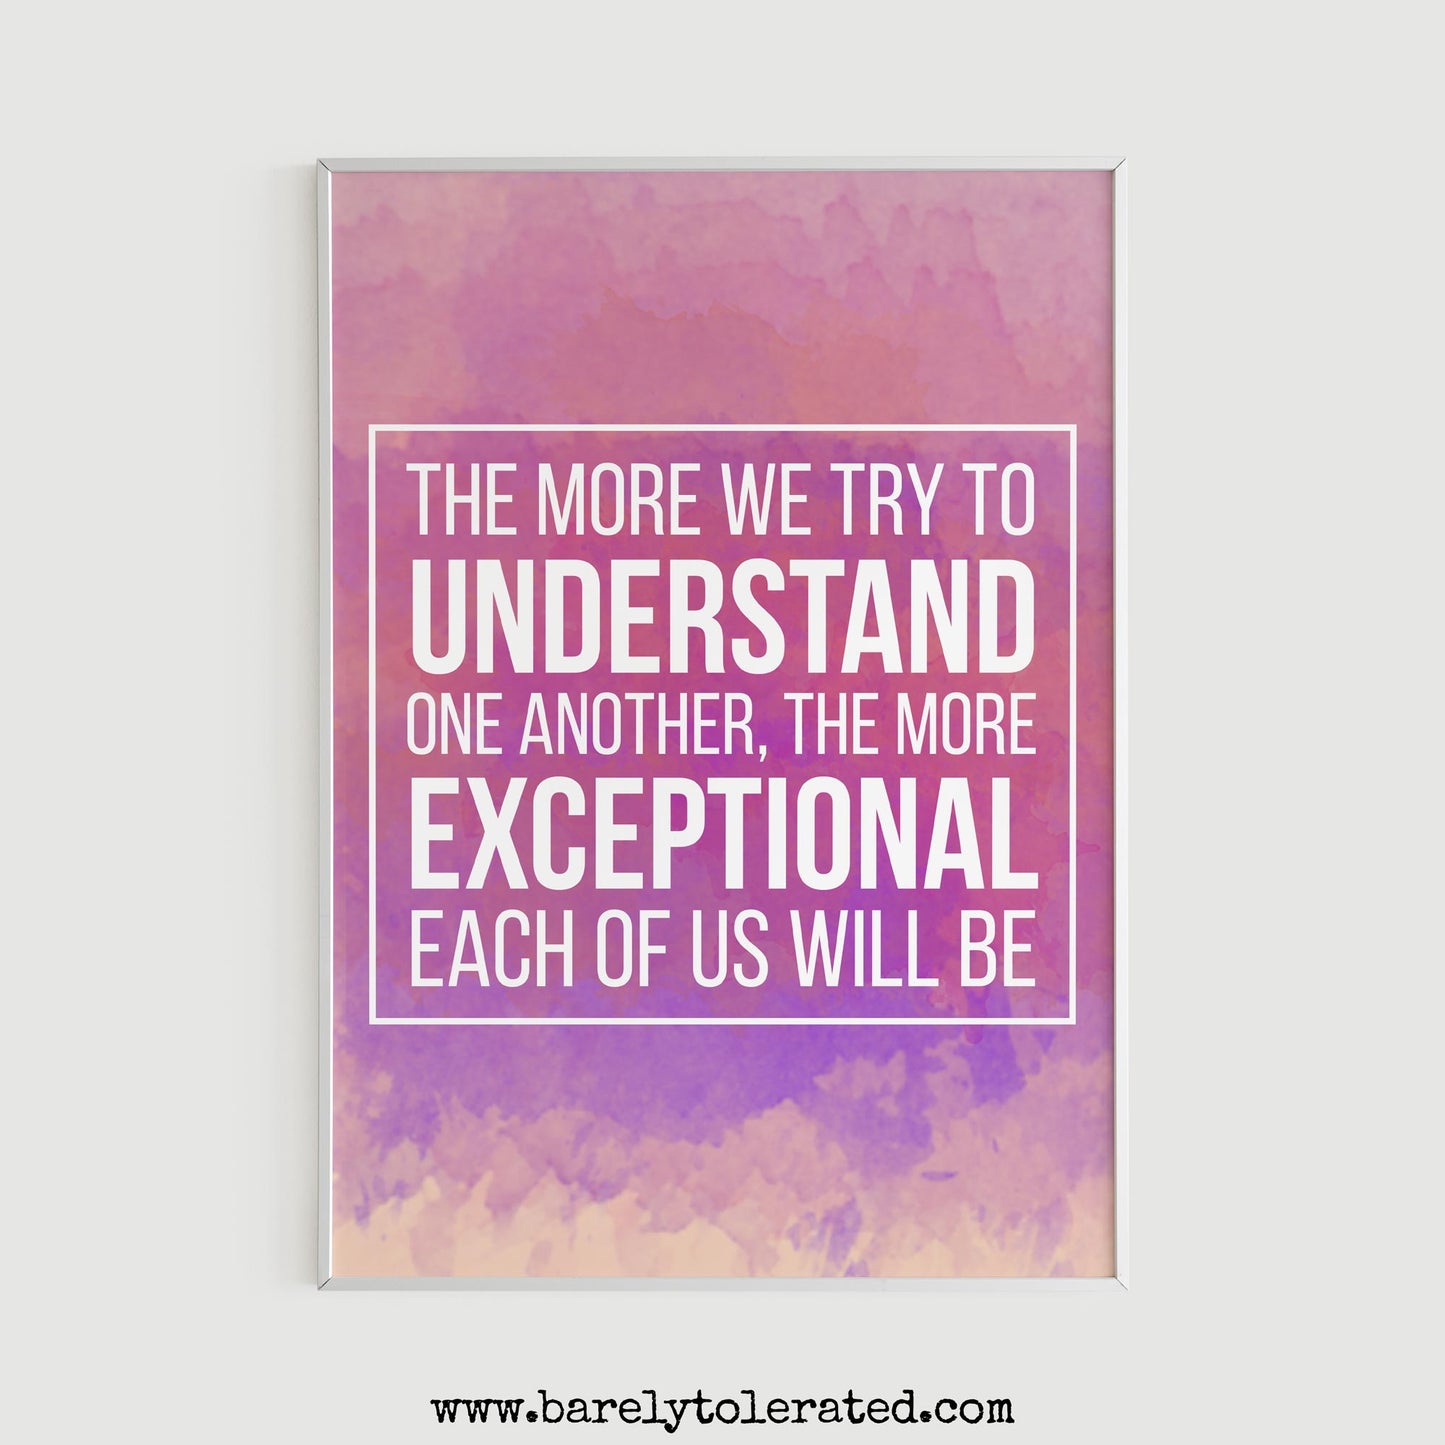 The More We Try To Understand One Another